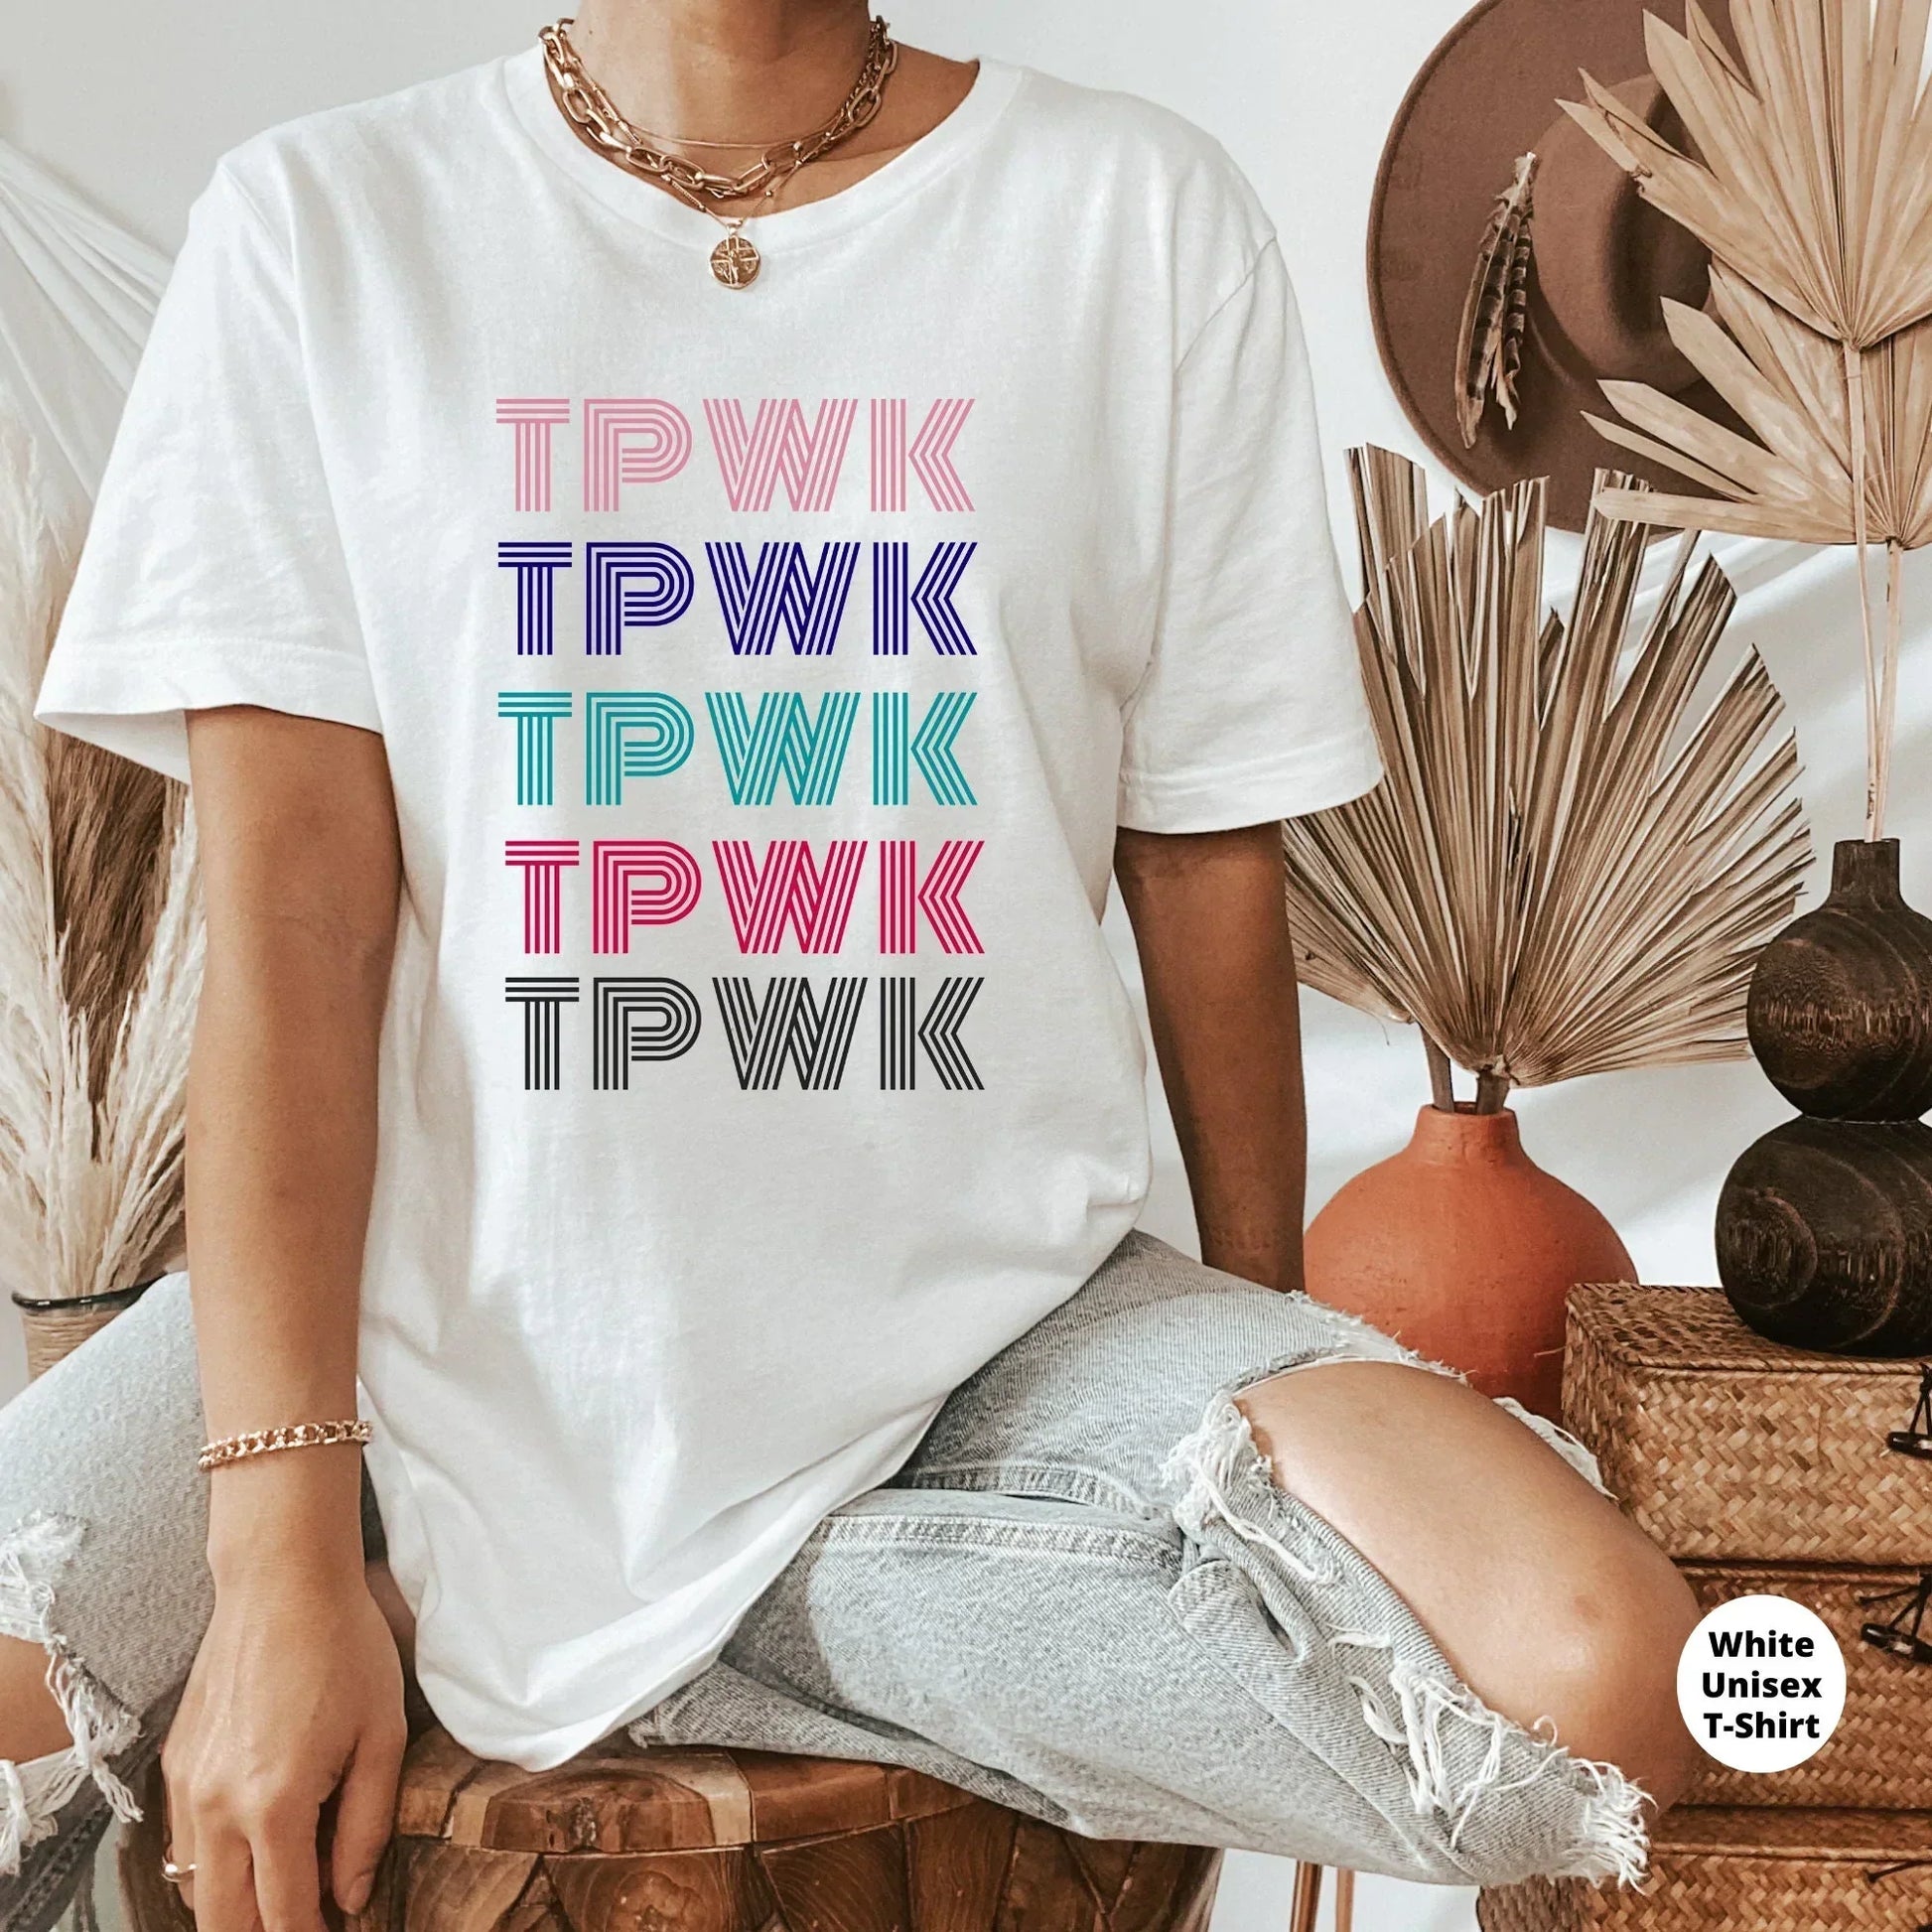 Retro TPWK Shirt, Treat People With Kindness, Harry Styles Shirt, Fine Line Shirt, Kindness Sweatshirt for Women, One Direction Hoodie